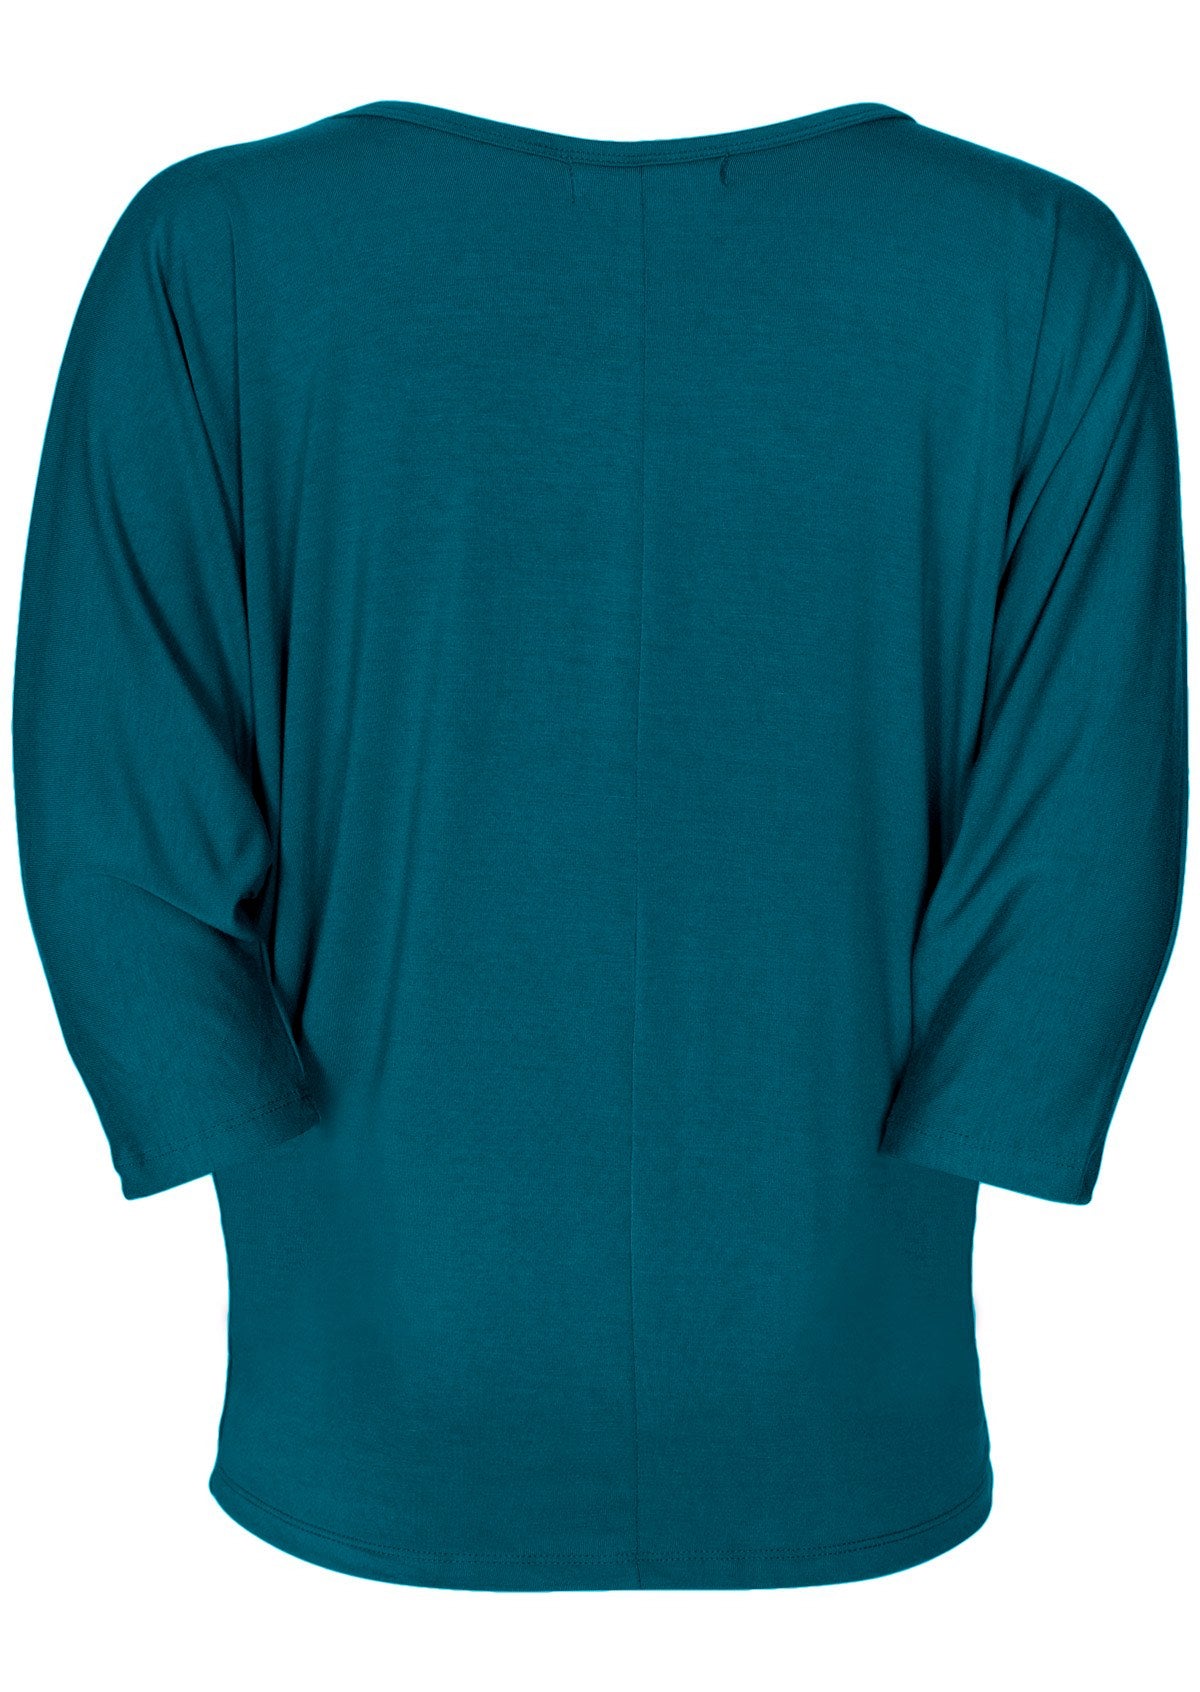 Back view of women's 3/4 sleeve rayon batwing v-neck teal top.